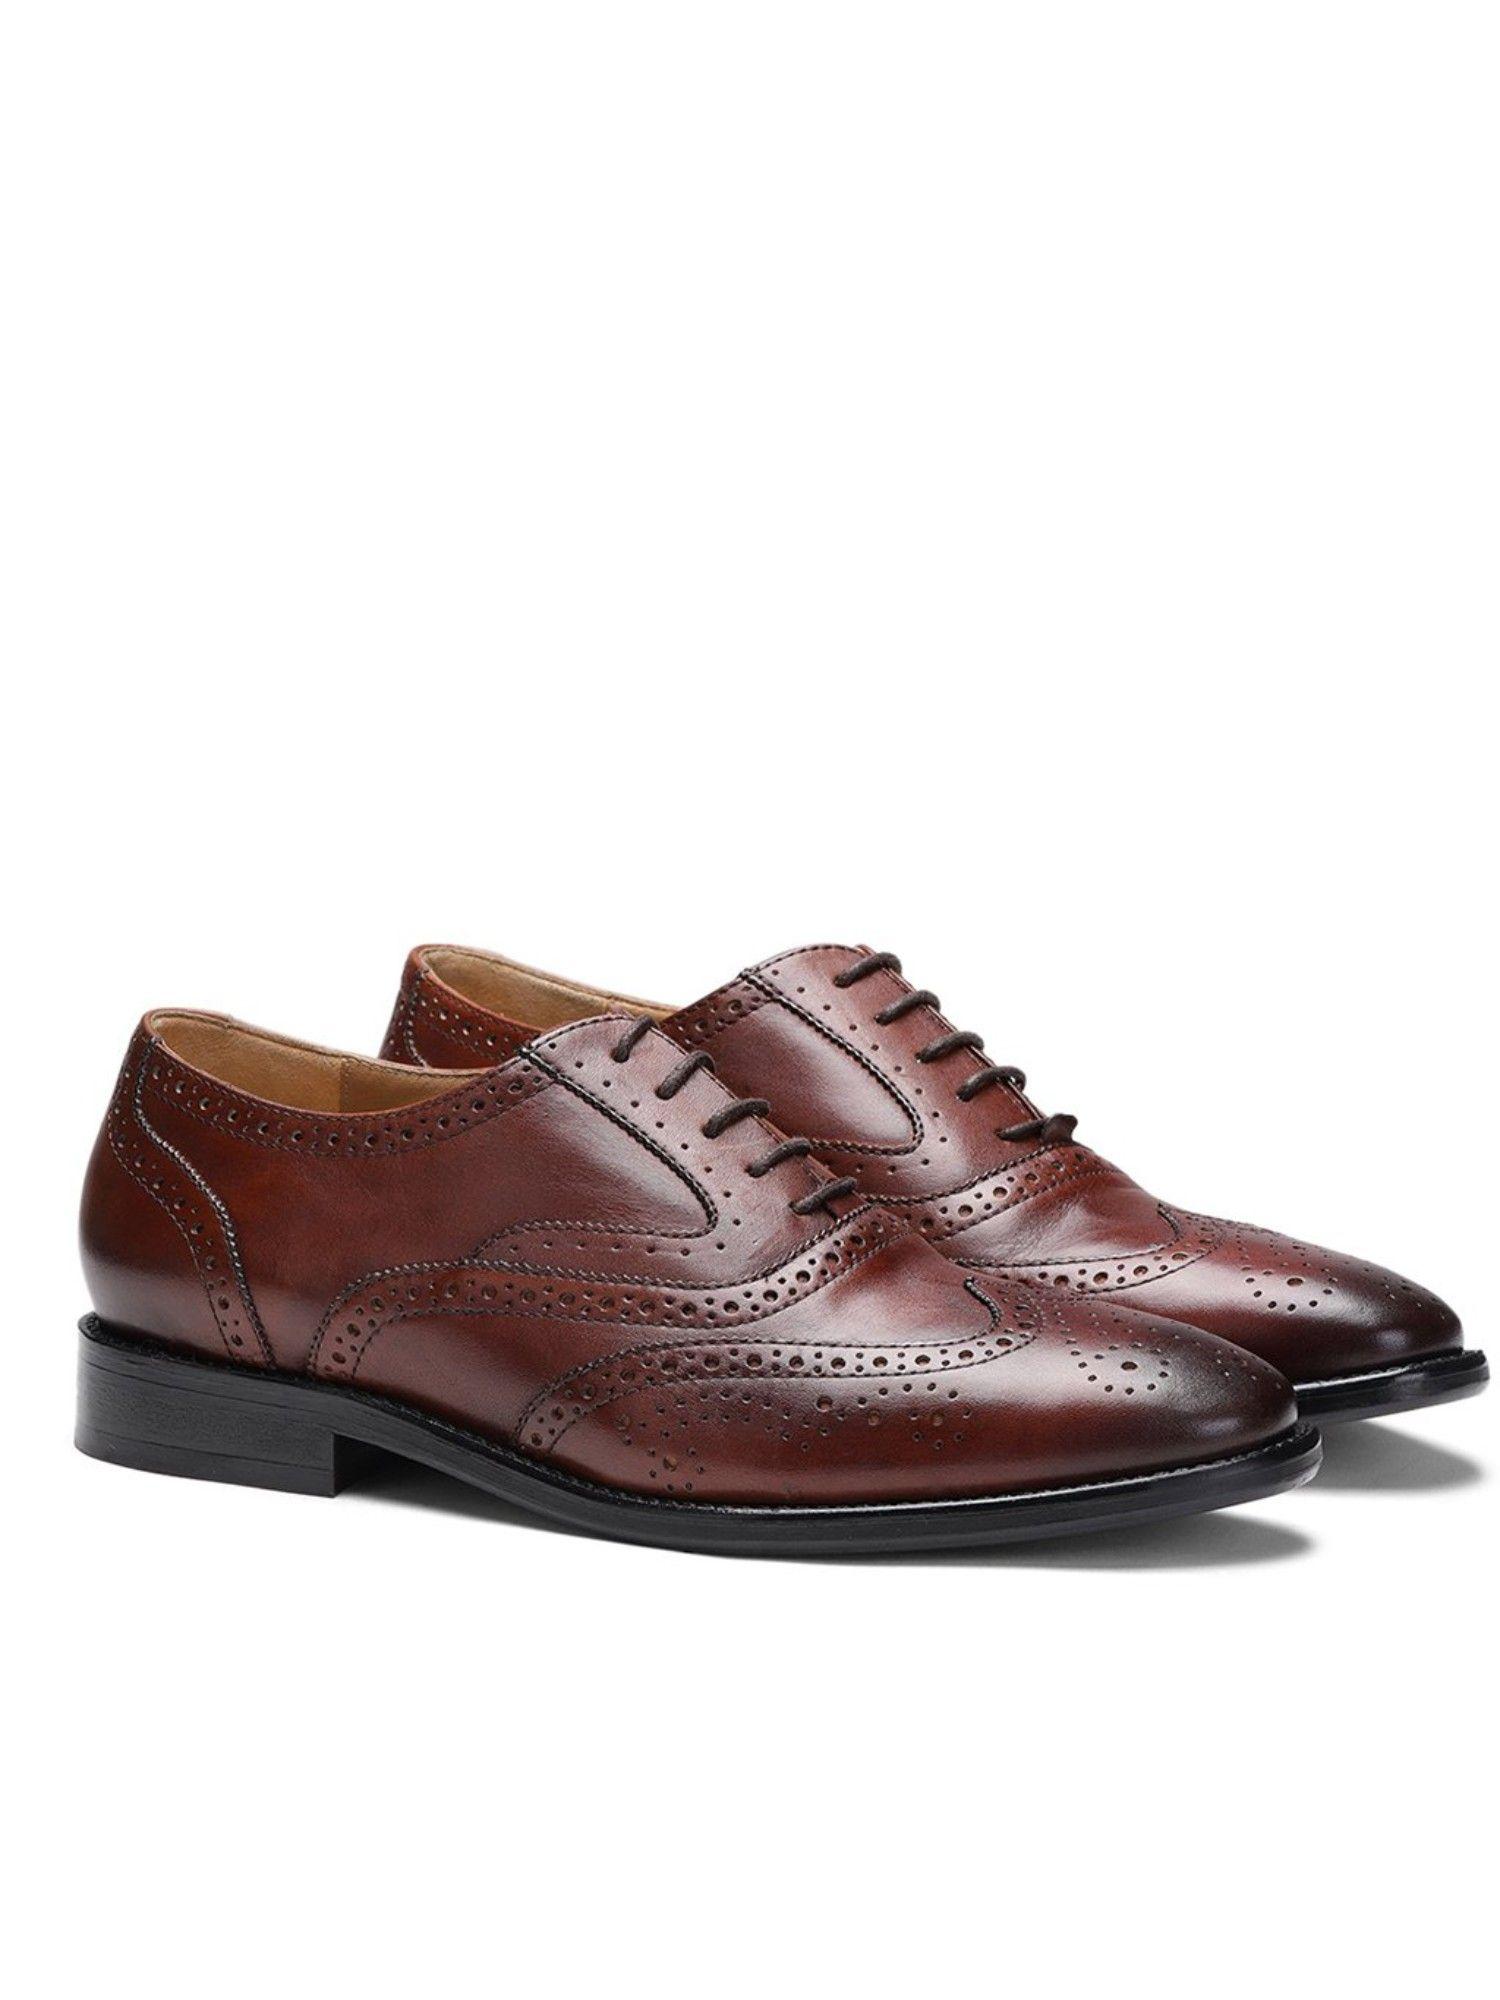 parthian cuoio brown leather lace up brogues